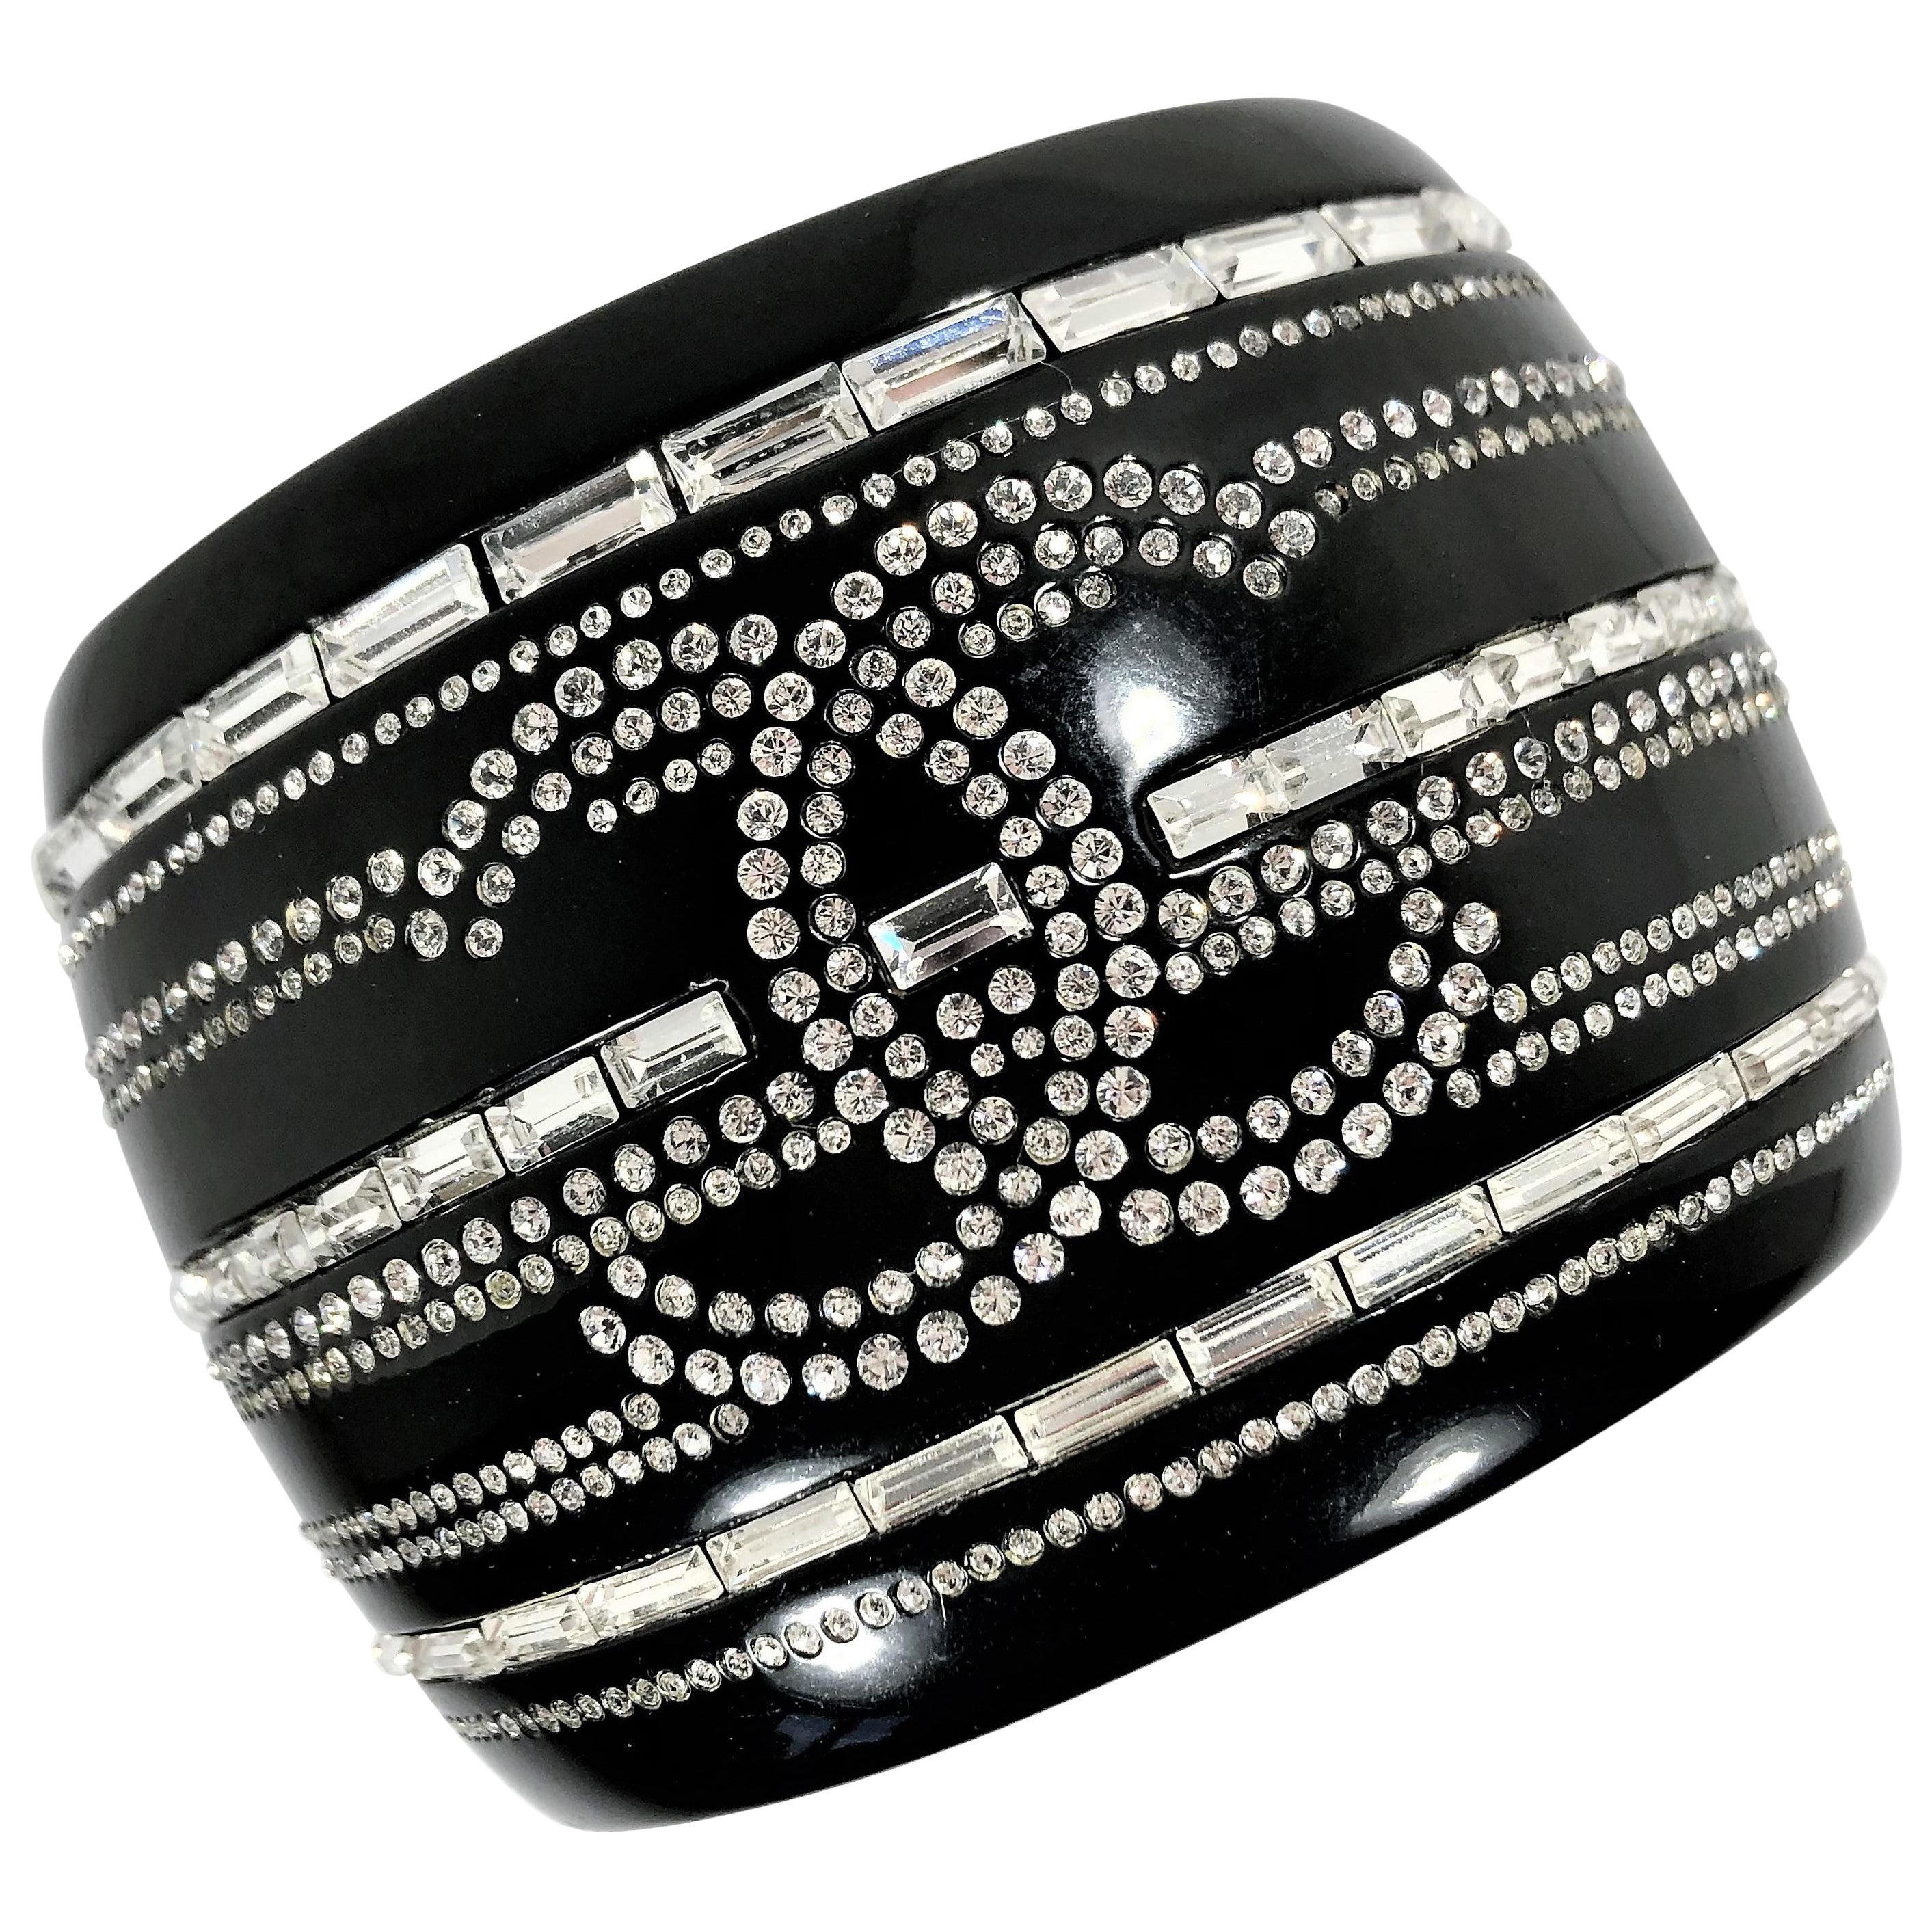 Major Chanel Black Resin Cuff with Rhinestones from the 2009 Cruise Collection